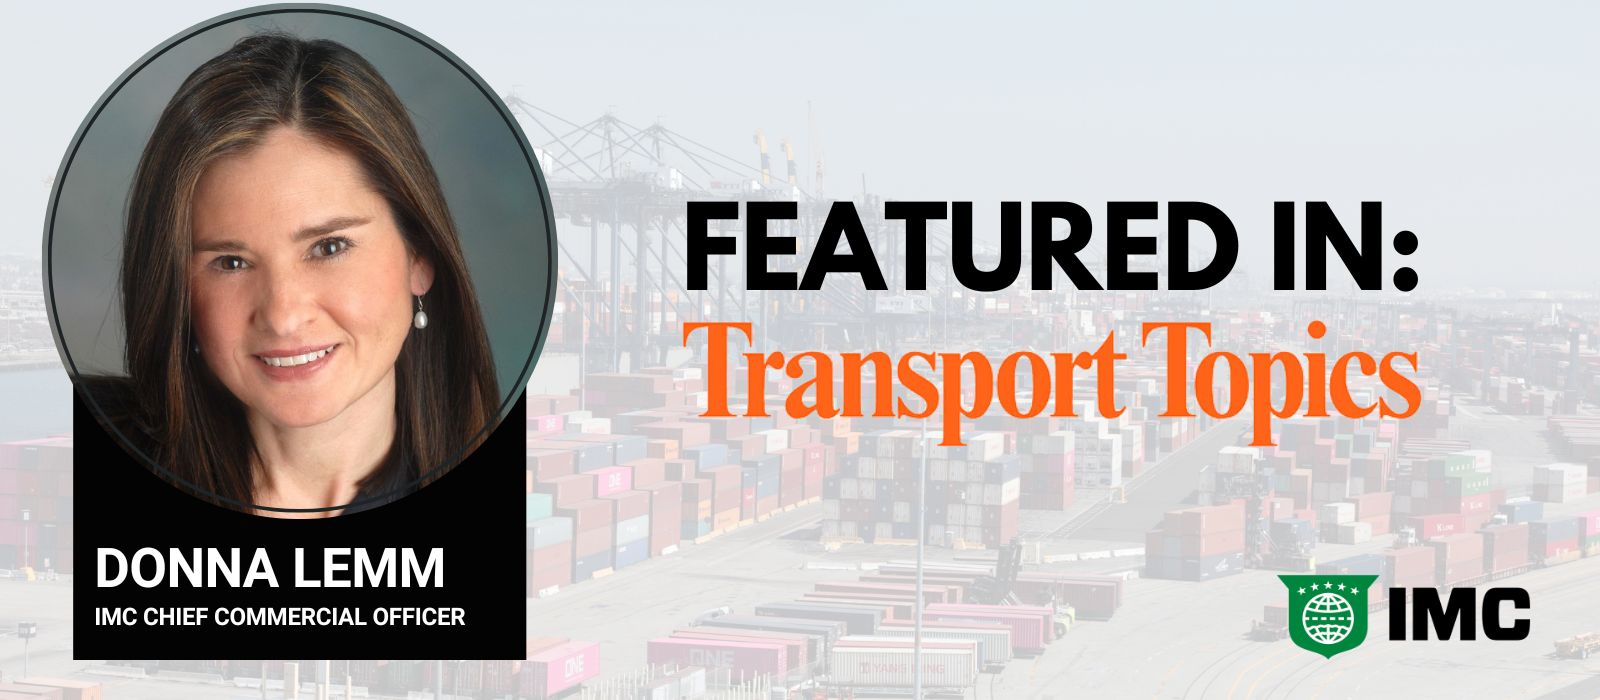 IMC’s Donna Lemm featured in Transport Topics